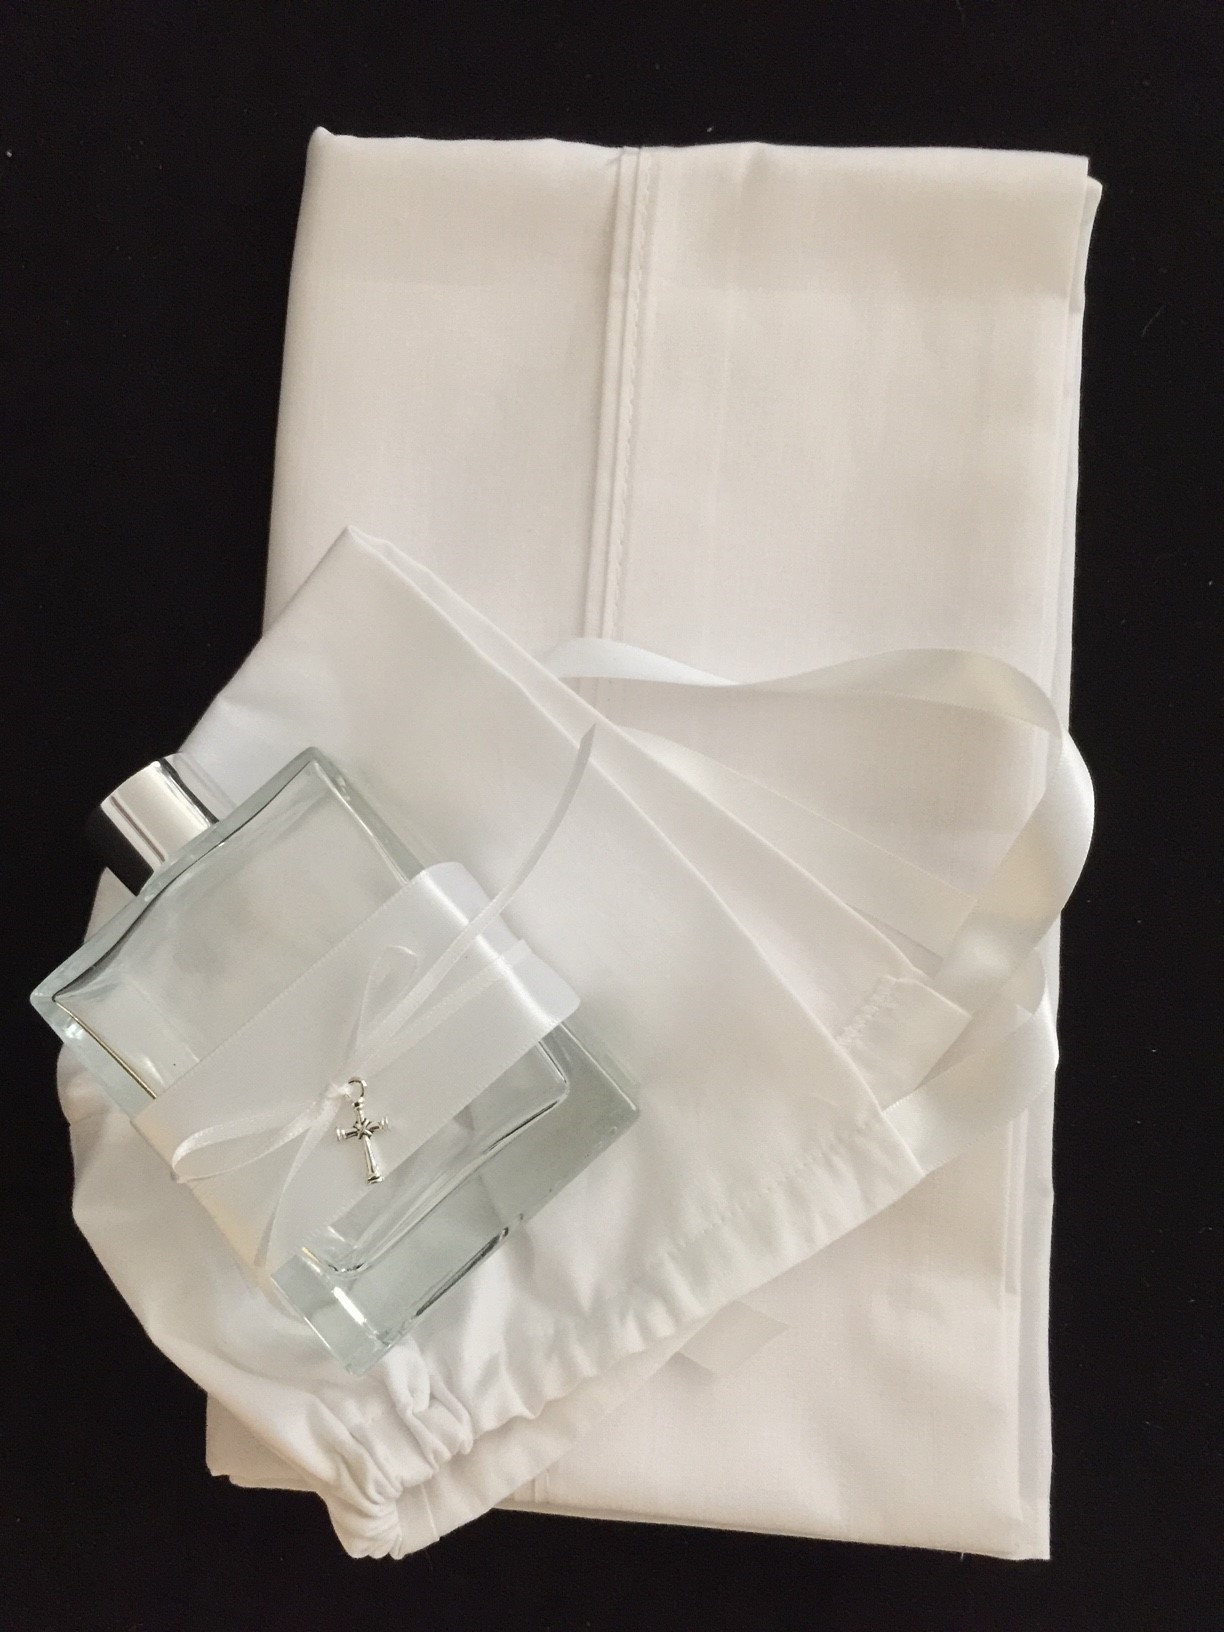 oil set with bonnet and cot size sheet - with or without lace no lace with oil bottle